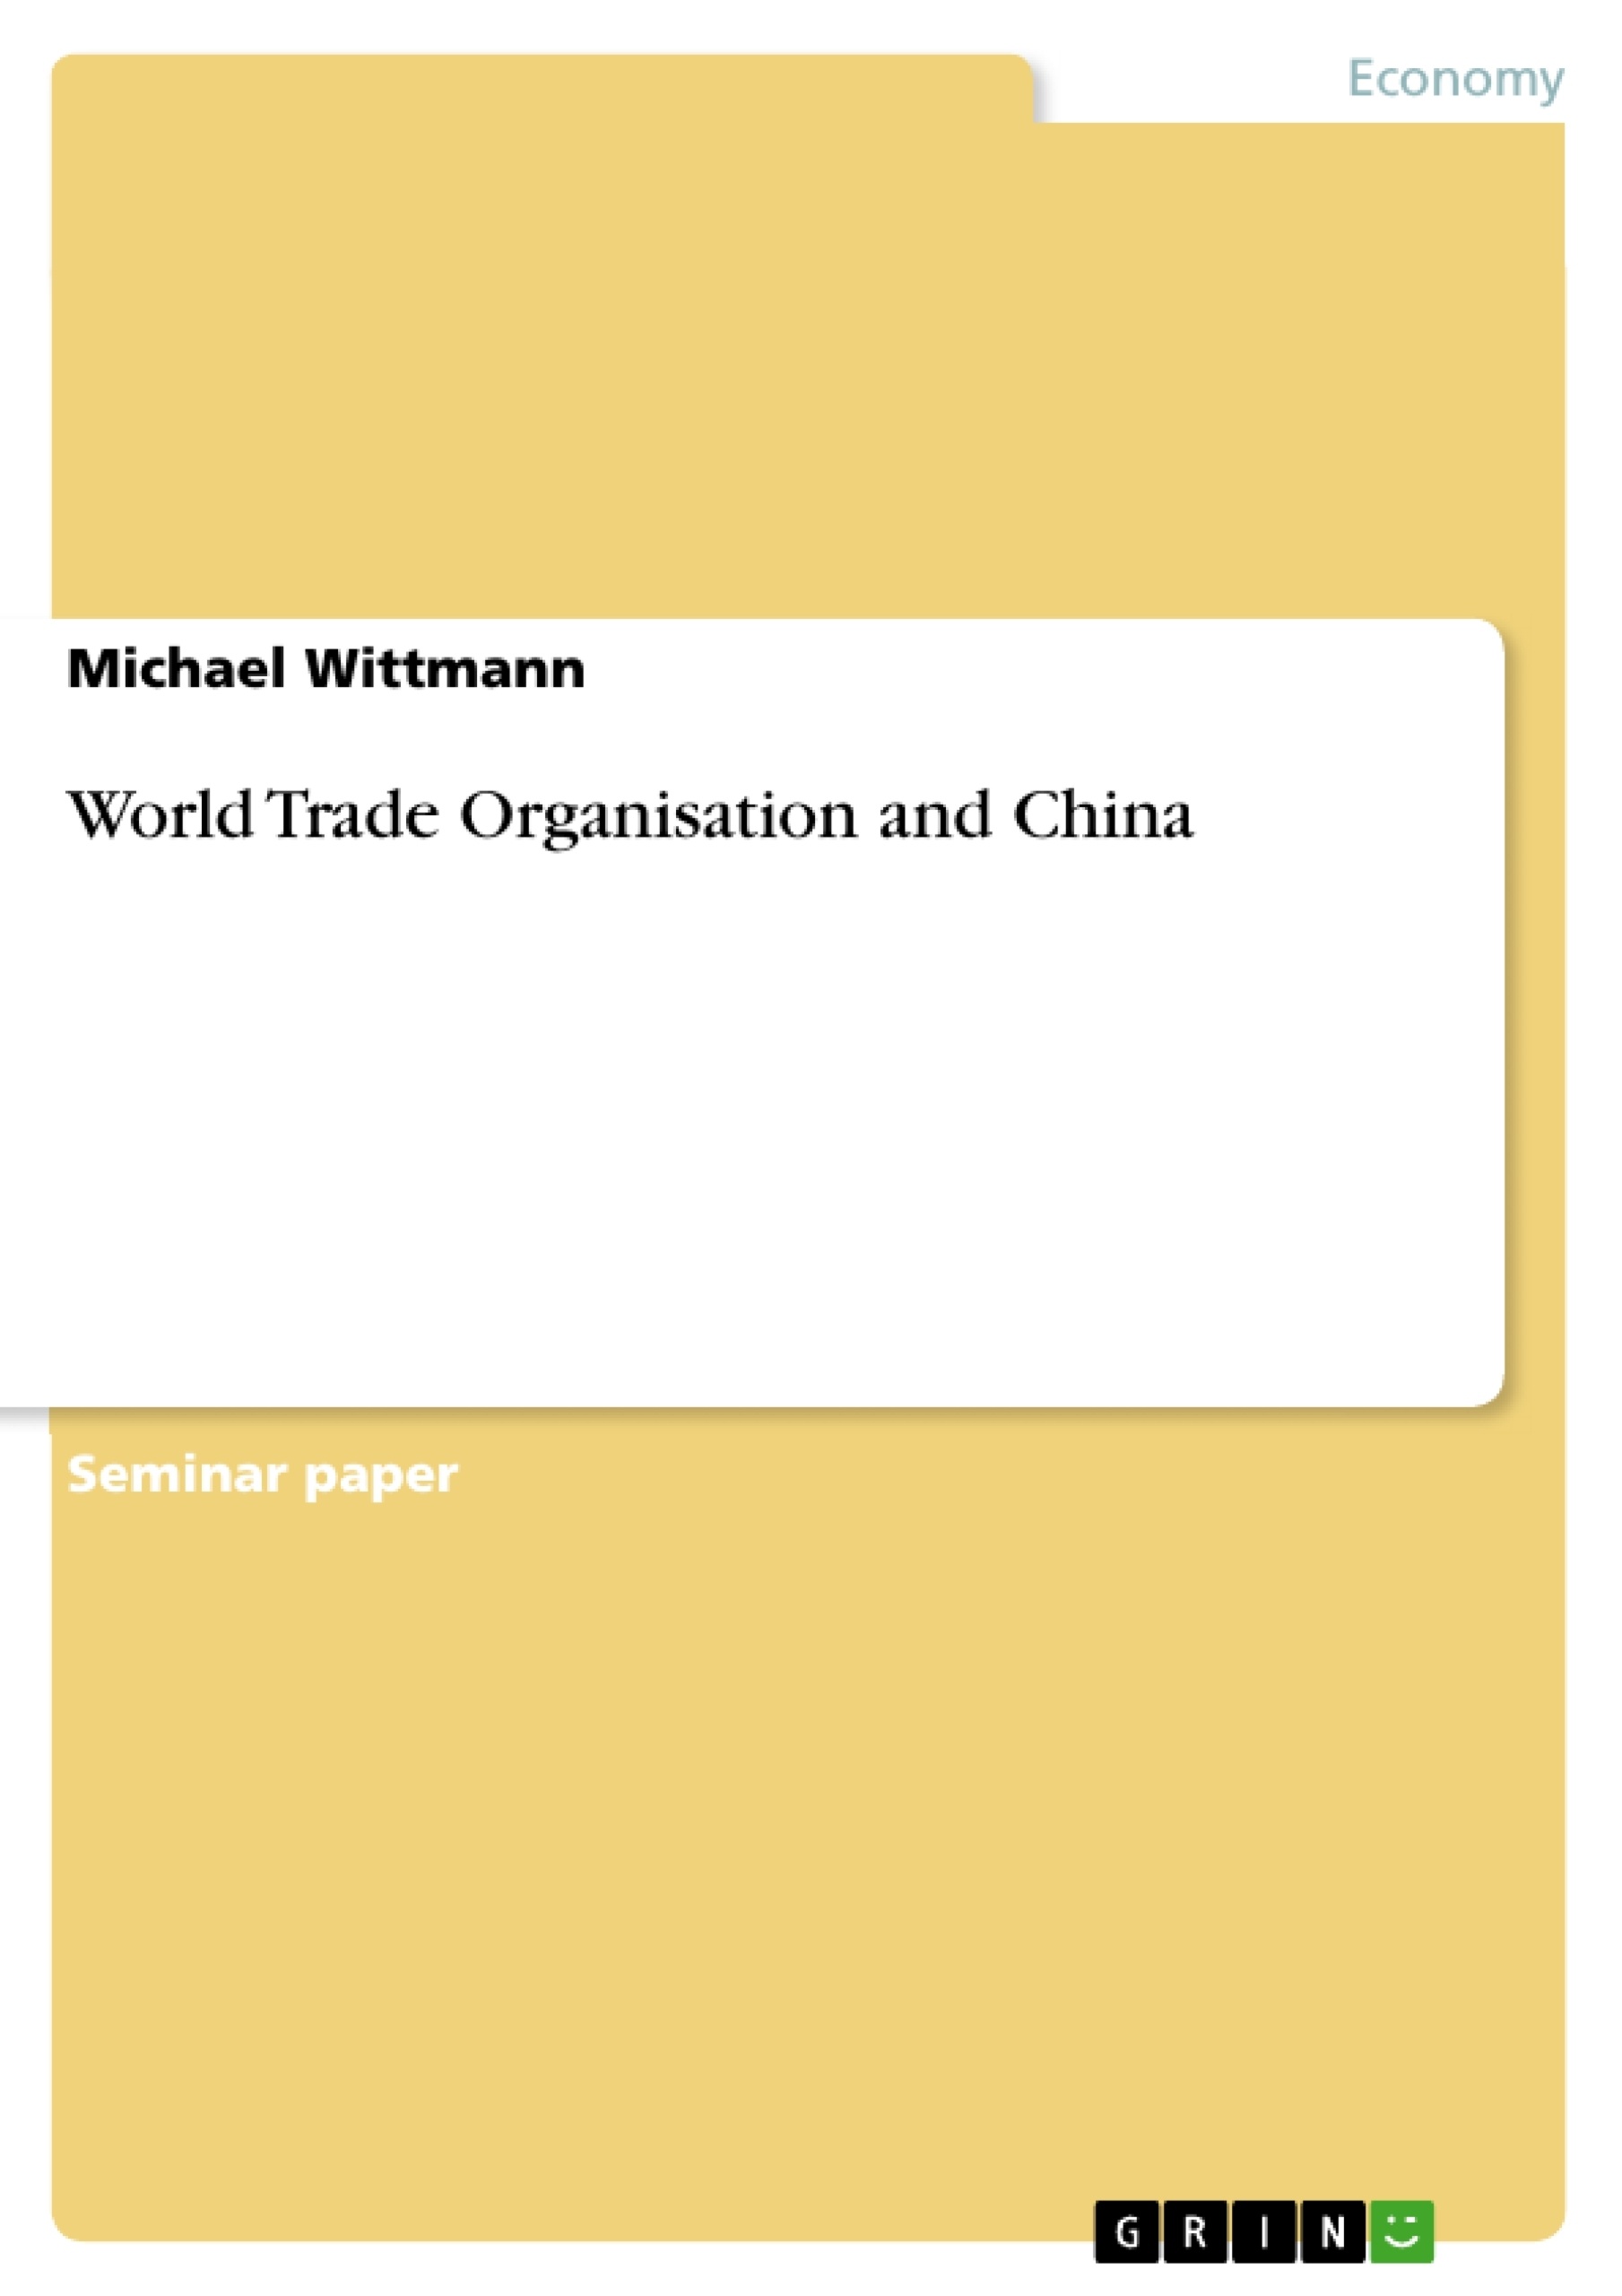 Title: World Trade Organisation and China